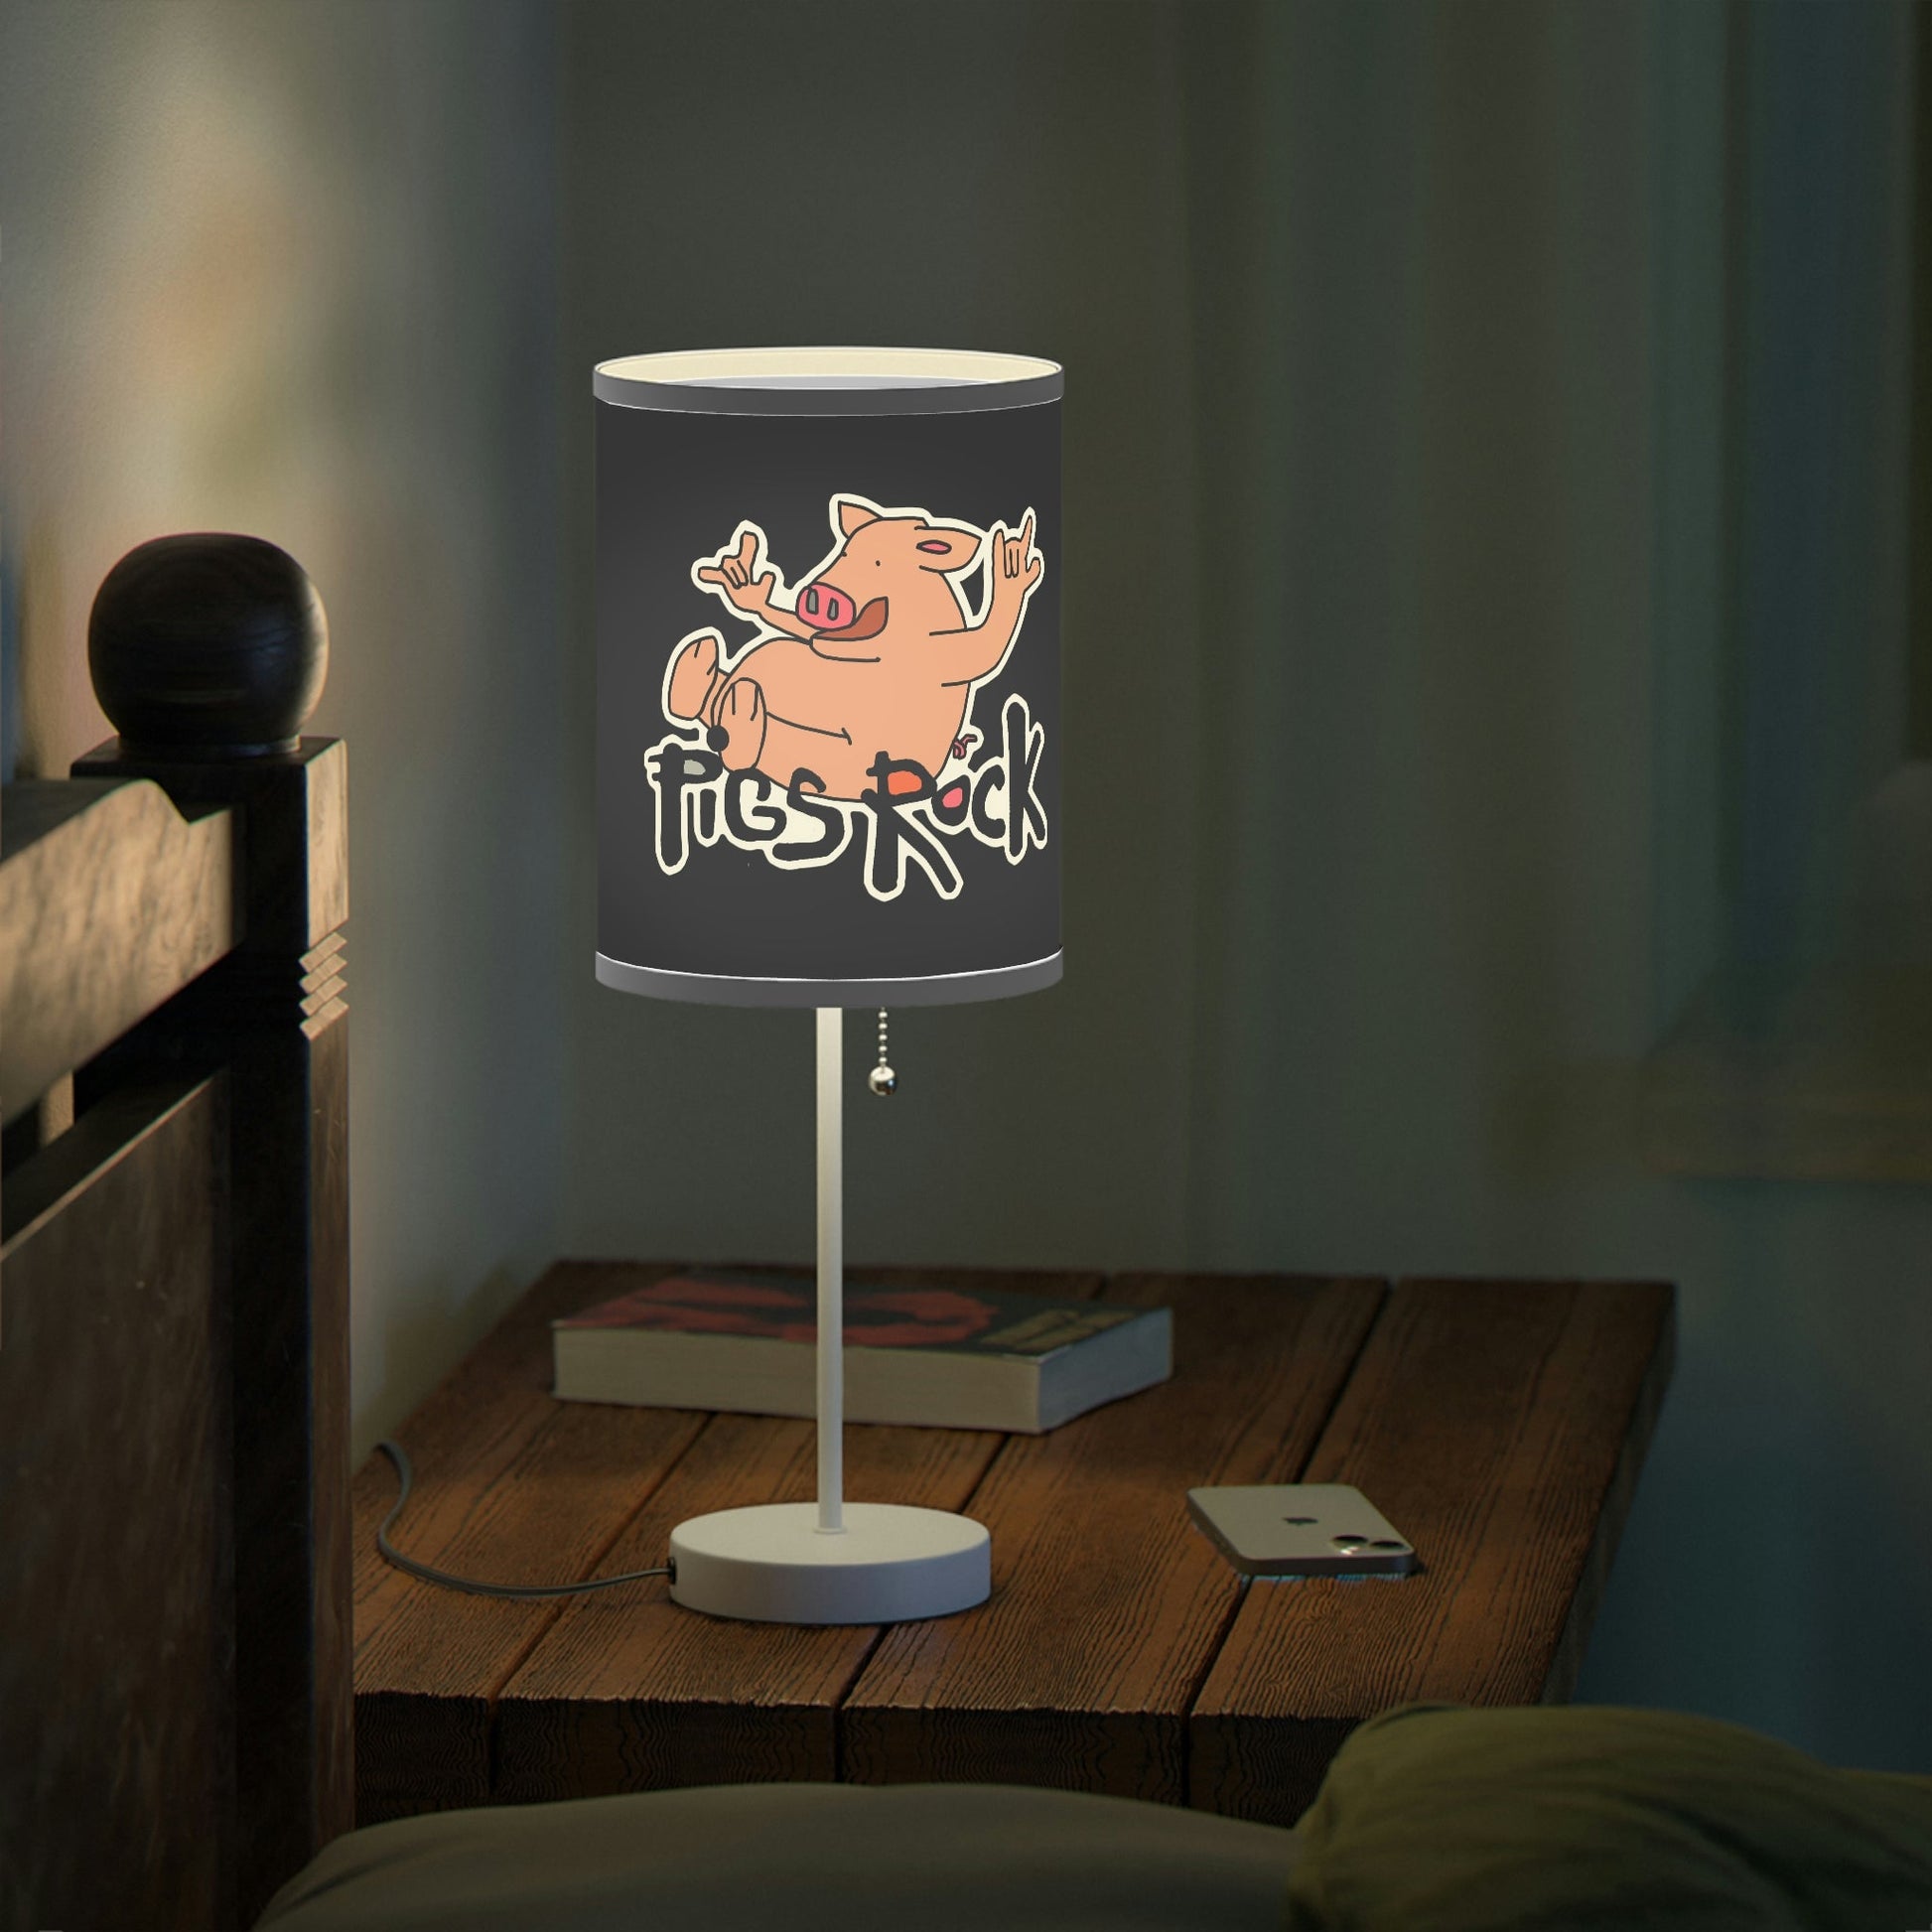 Pigs Rock! Lamp on a Stand, US|CA plug